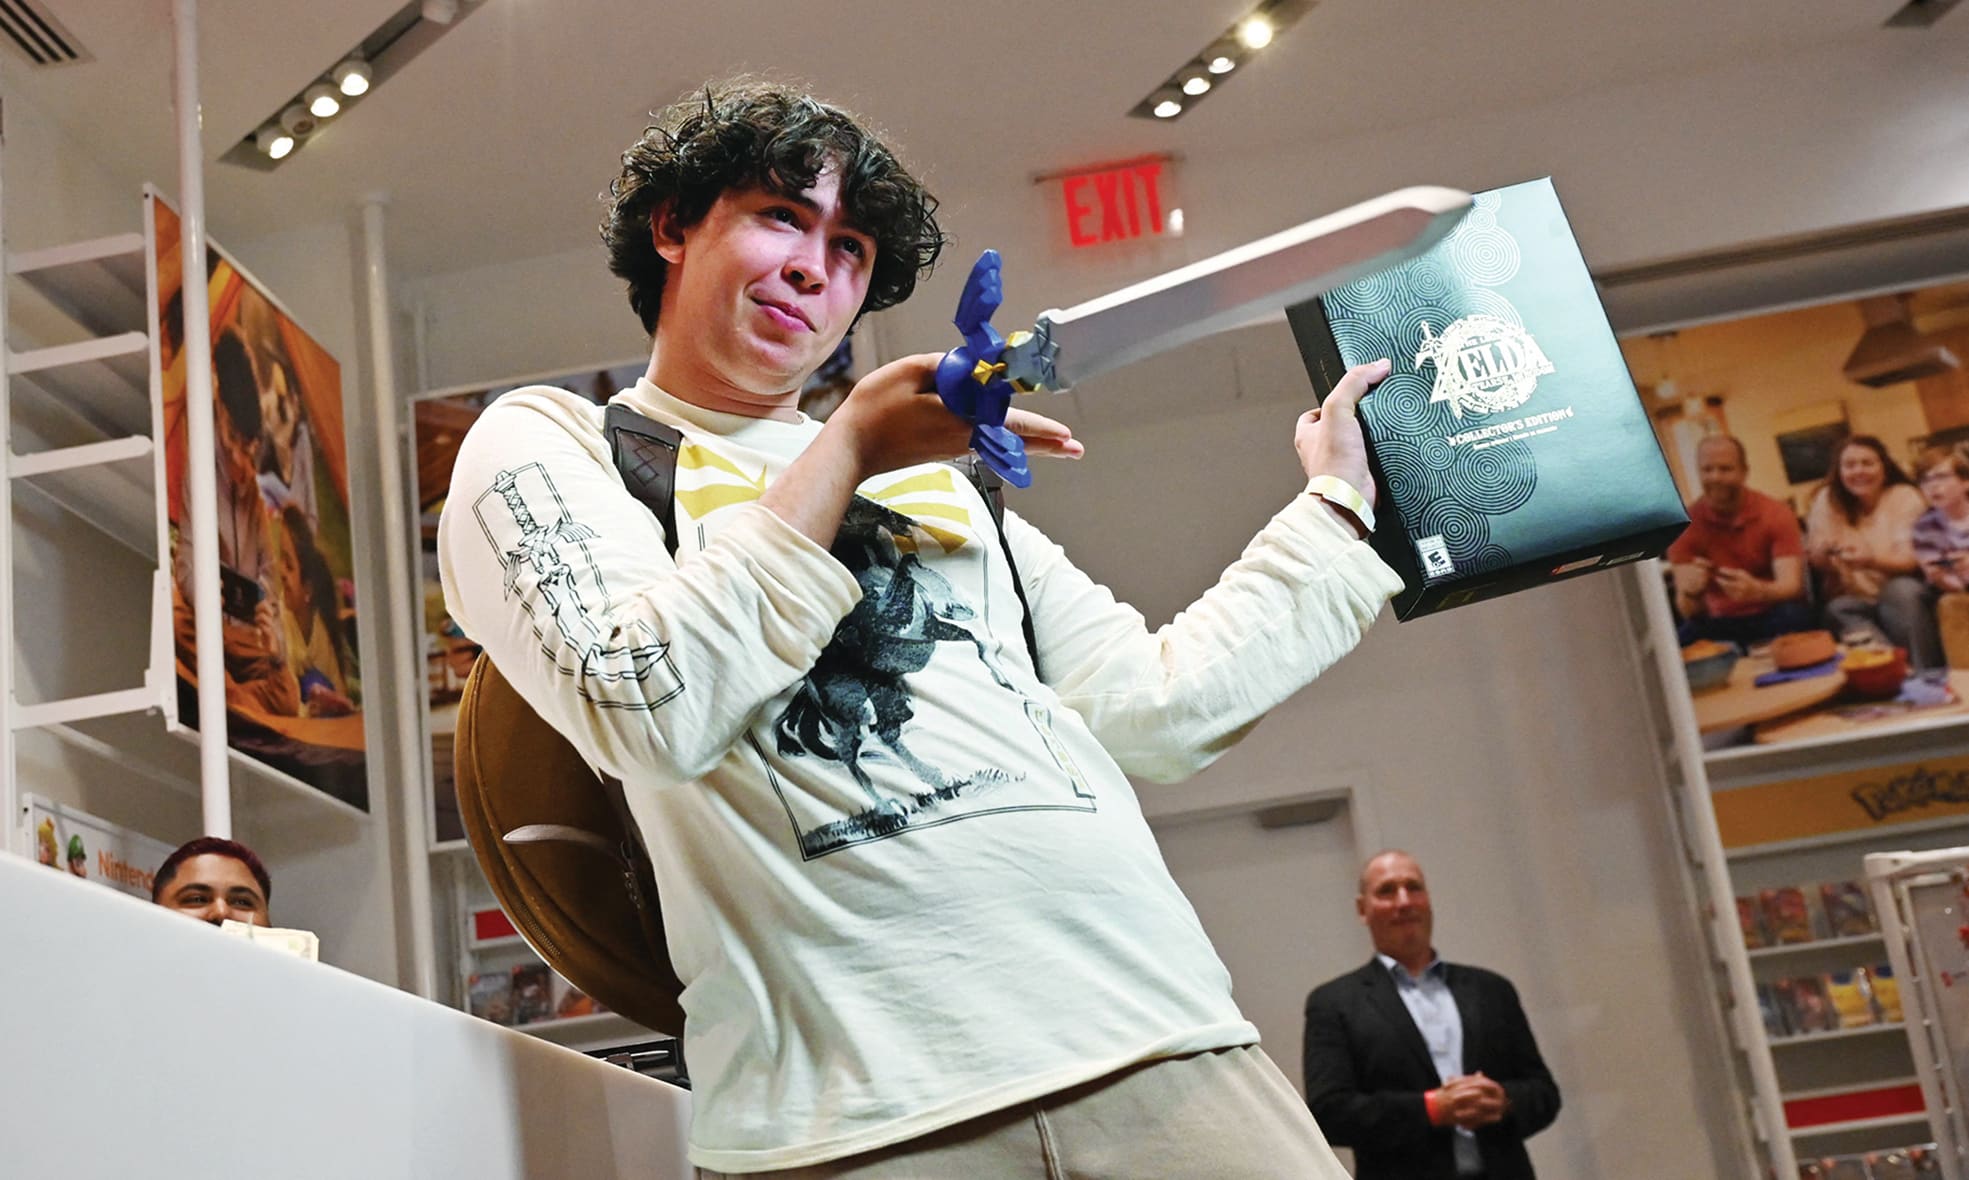 First customer David Castillo wields the Master Sword as he poses for a photo after purchasing 'The Legend of Zelda: Tears of the Kingdom' during a launch event for the game at a Nintendo store in New York.